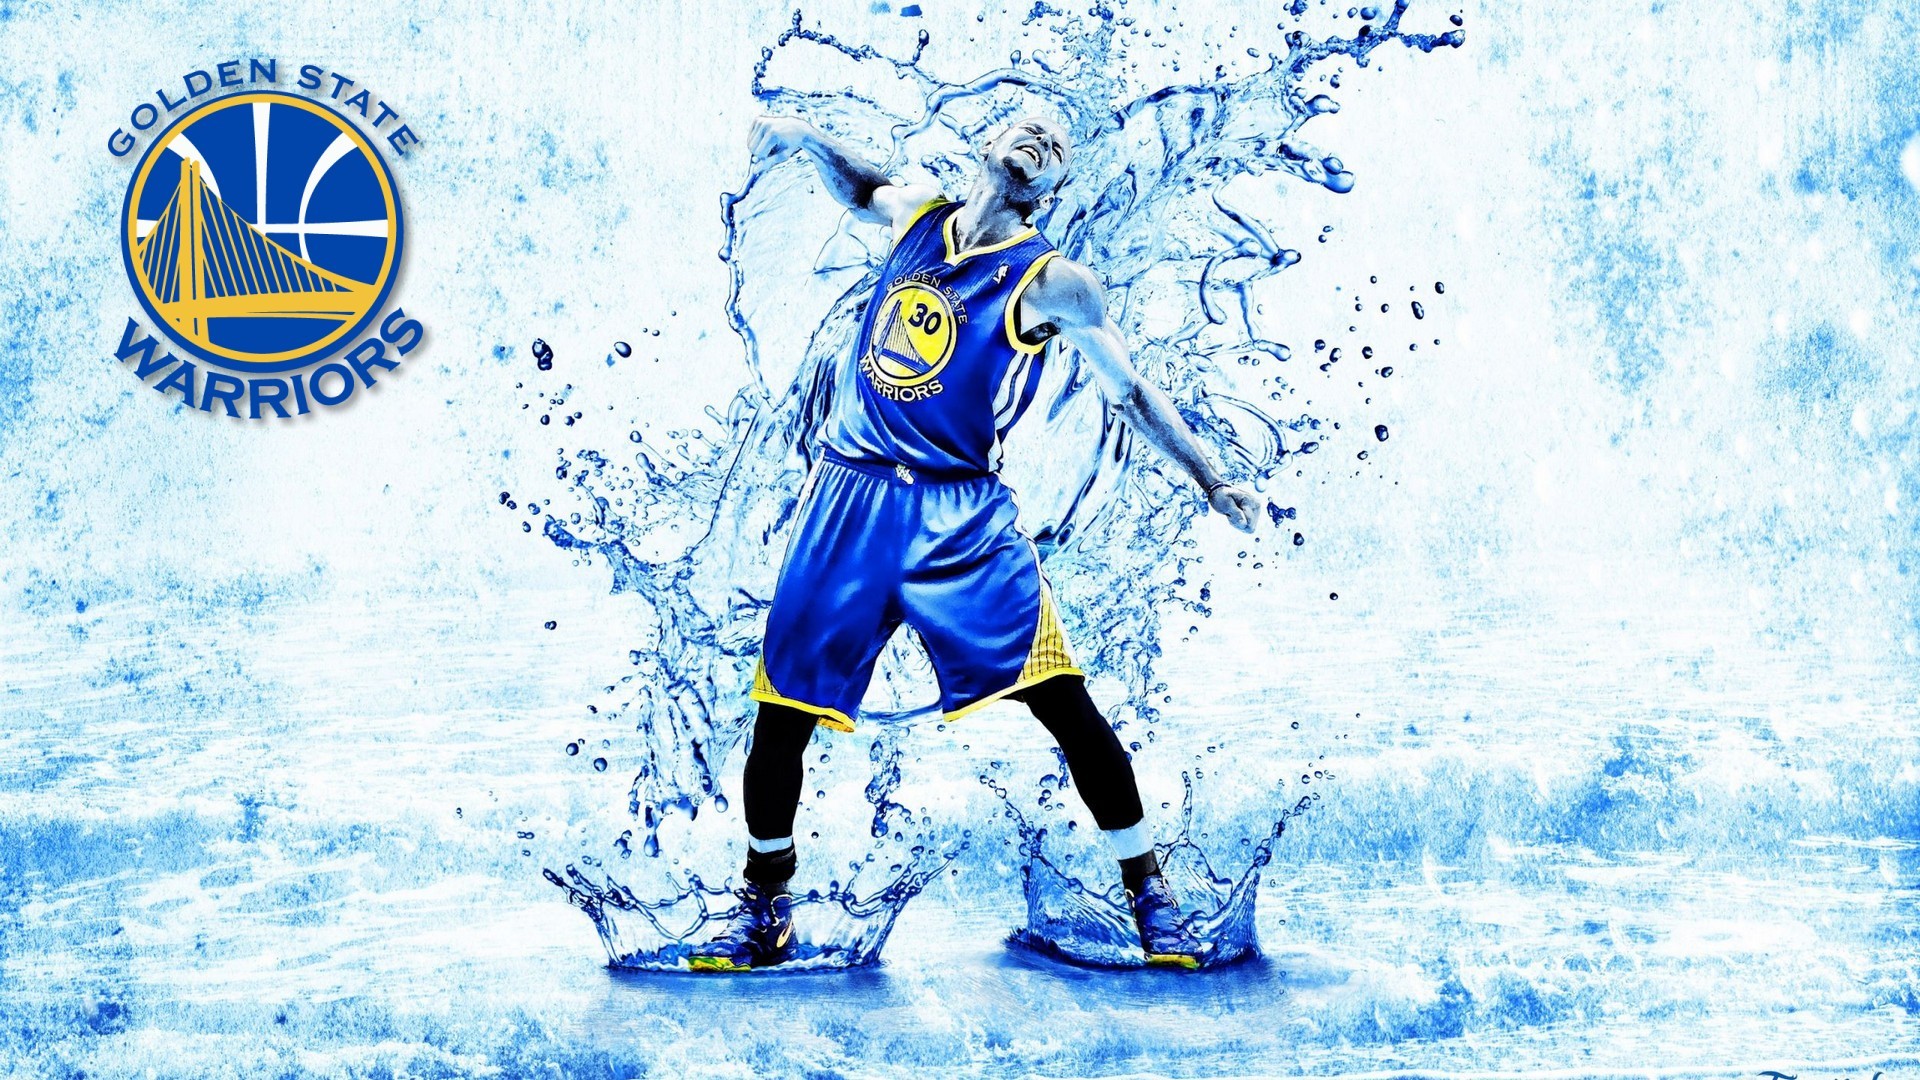 1920x1080 Stephen Curry HD Wallpapers with image dimensions  pixel. You can  make this wallpaper for